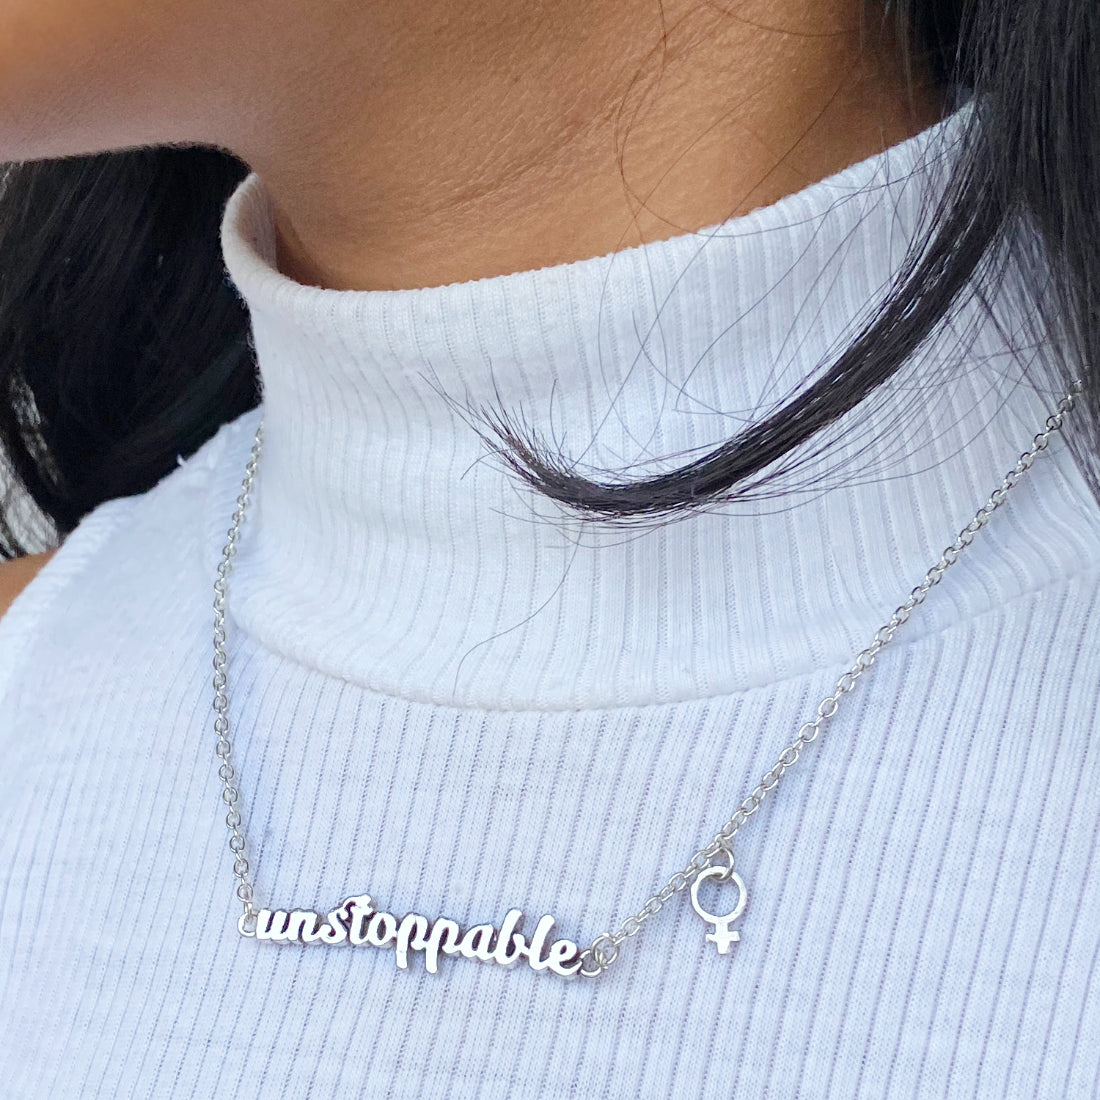 UNSTOPPABLE CHAIN NECKLACE WITH GIRL CHARM